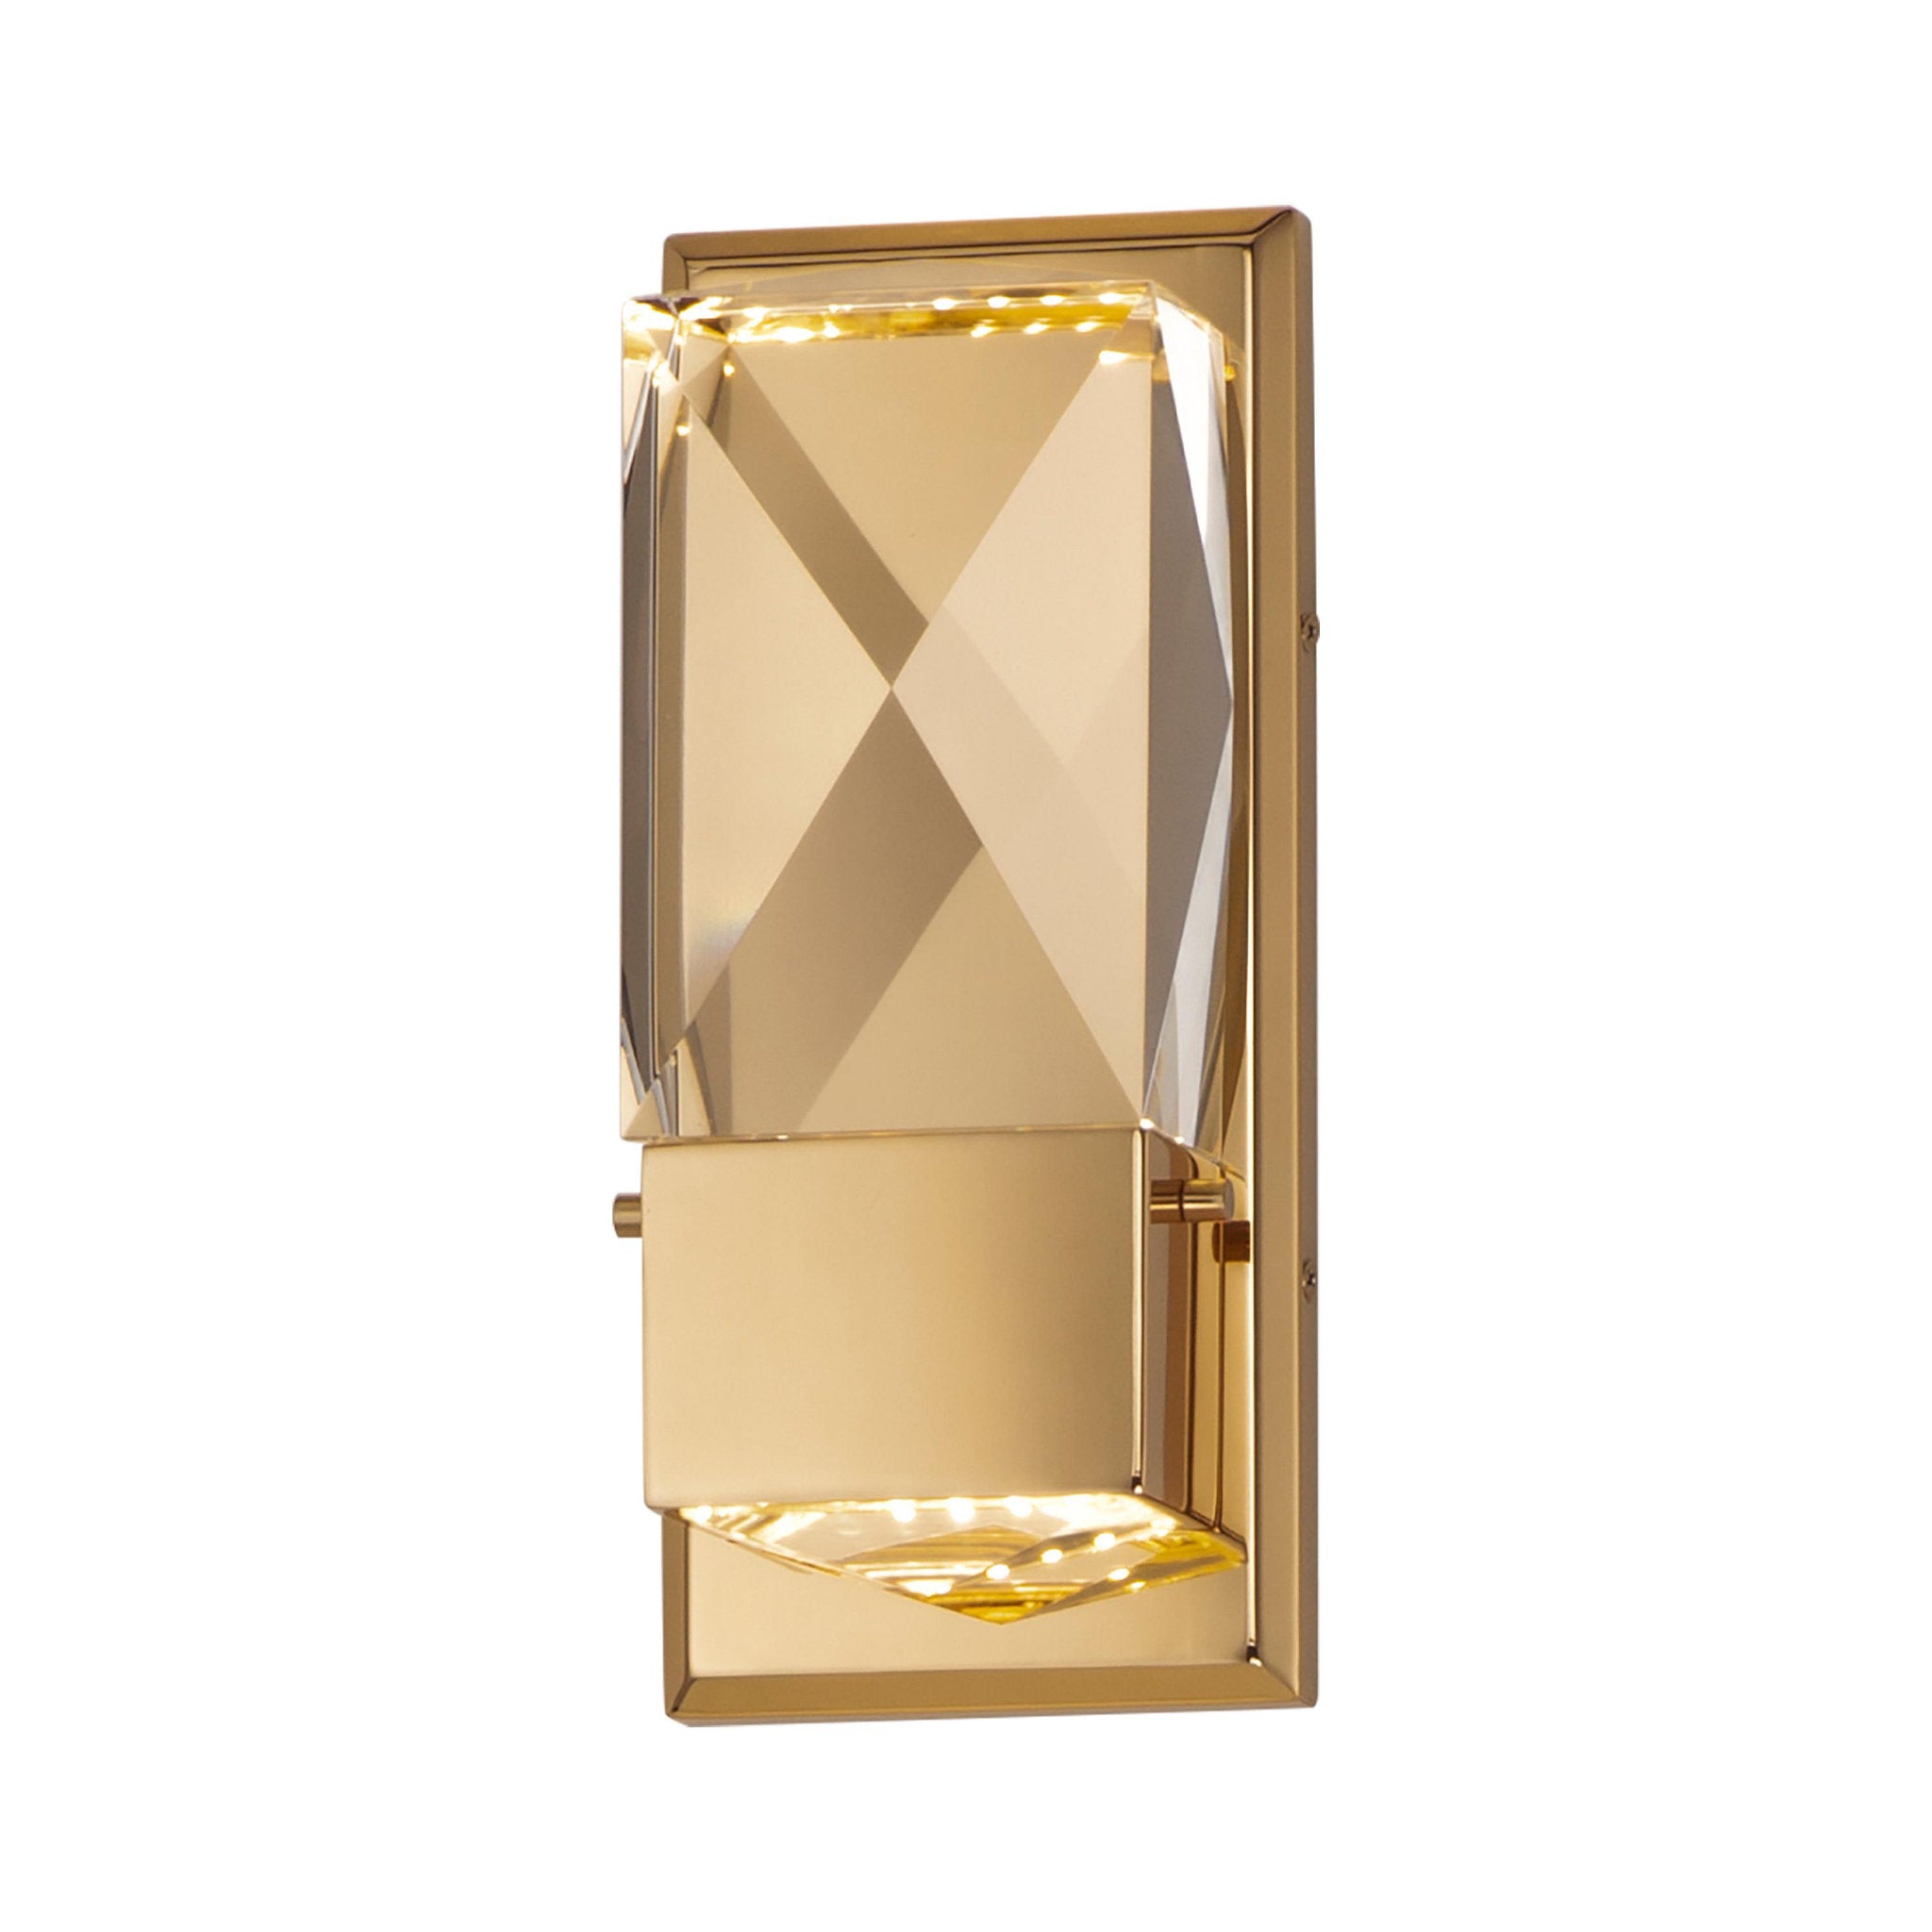 Studio M SM23642BCFG Empire LED - ADA Wall Sconce in French Gold